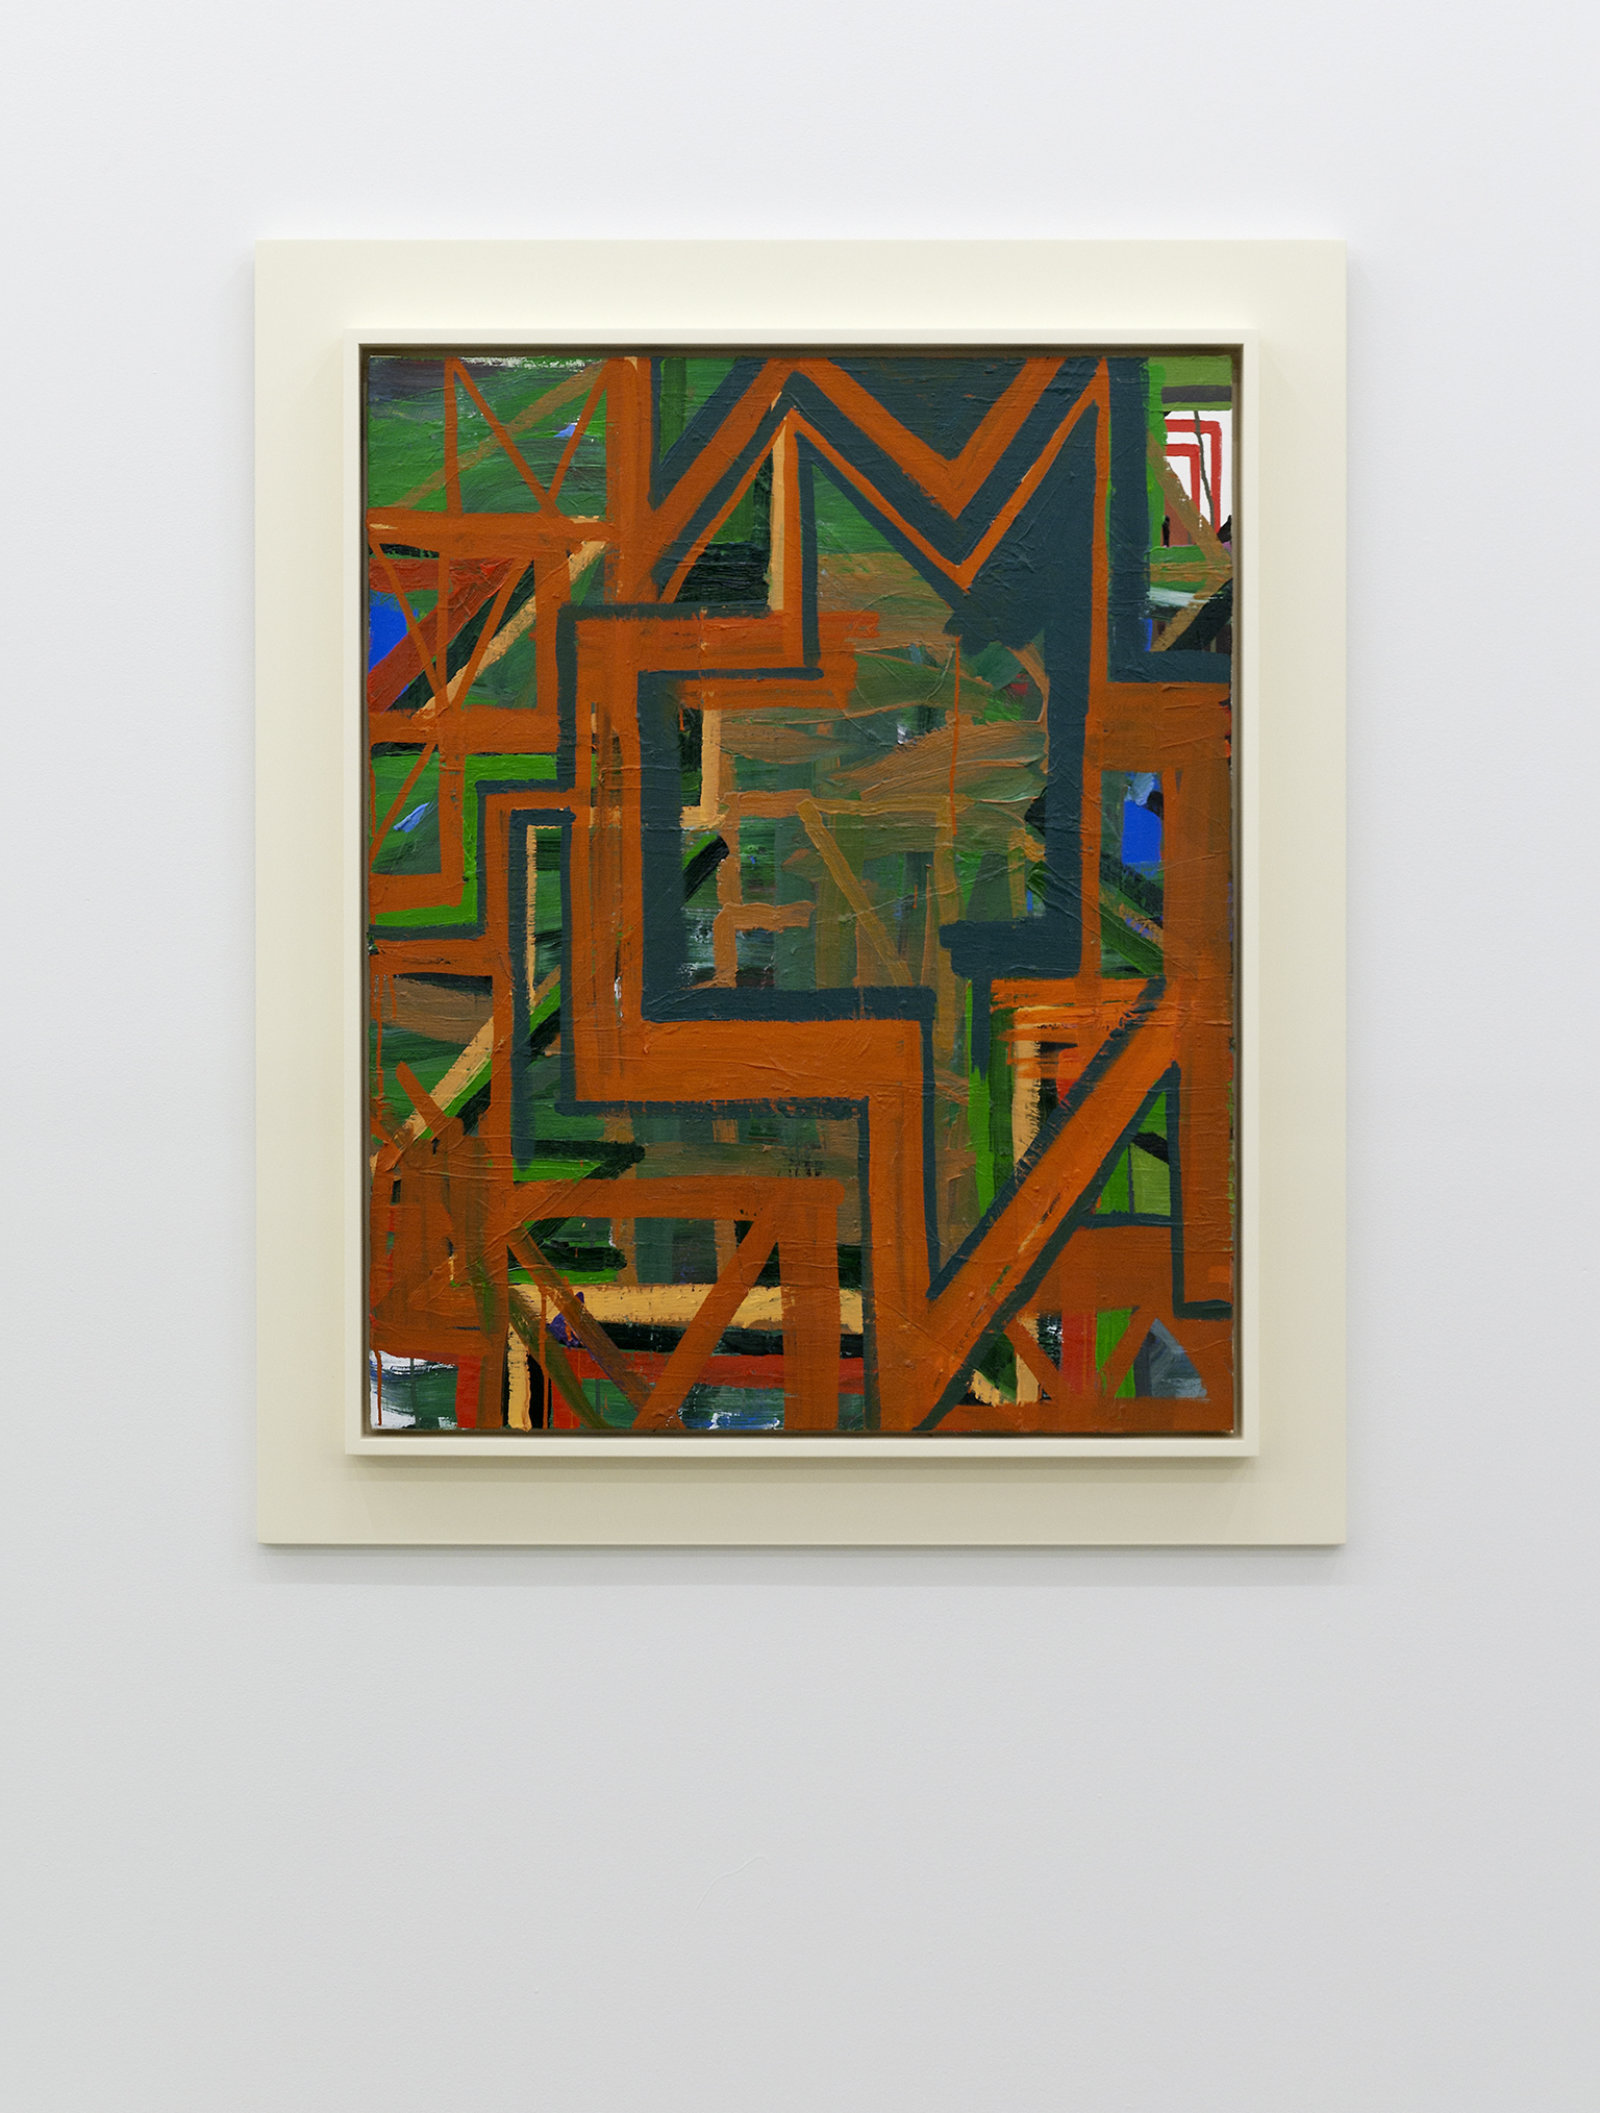 Damian Moppett, Untitled Green and Orange Abstraction, 2010, oil on canvas and wood frame, 42 x 36 in. (107 x 91 cm)